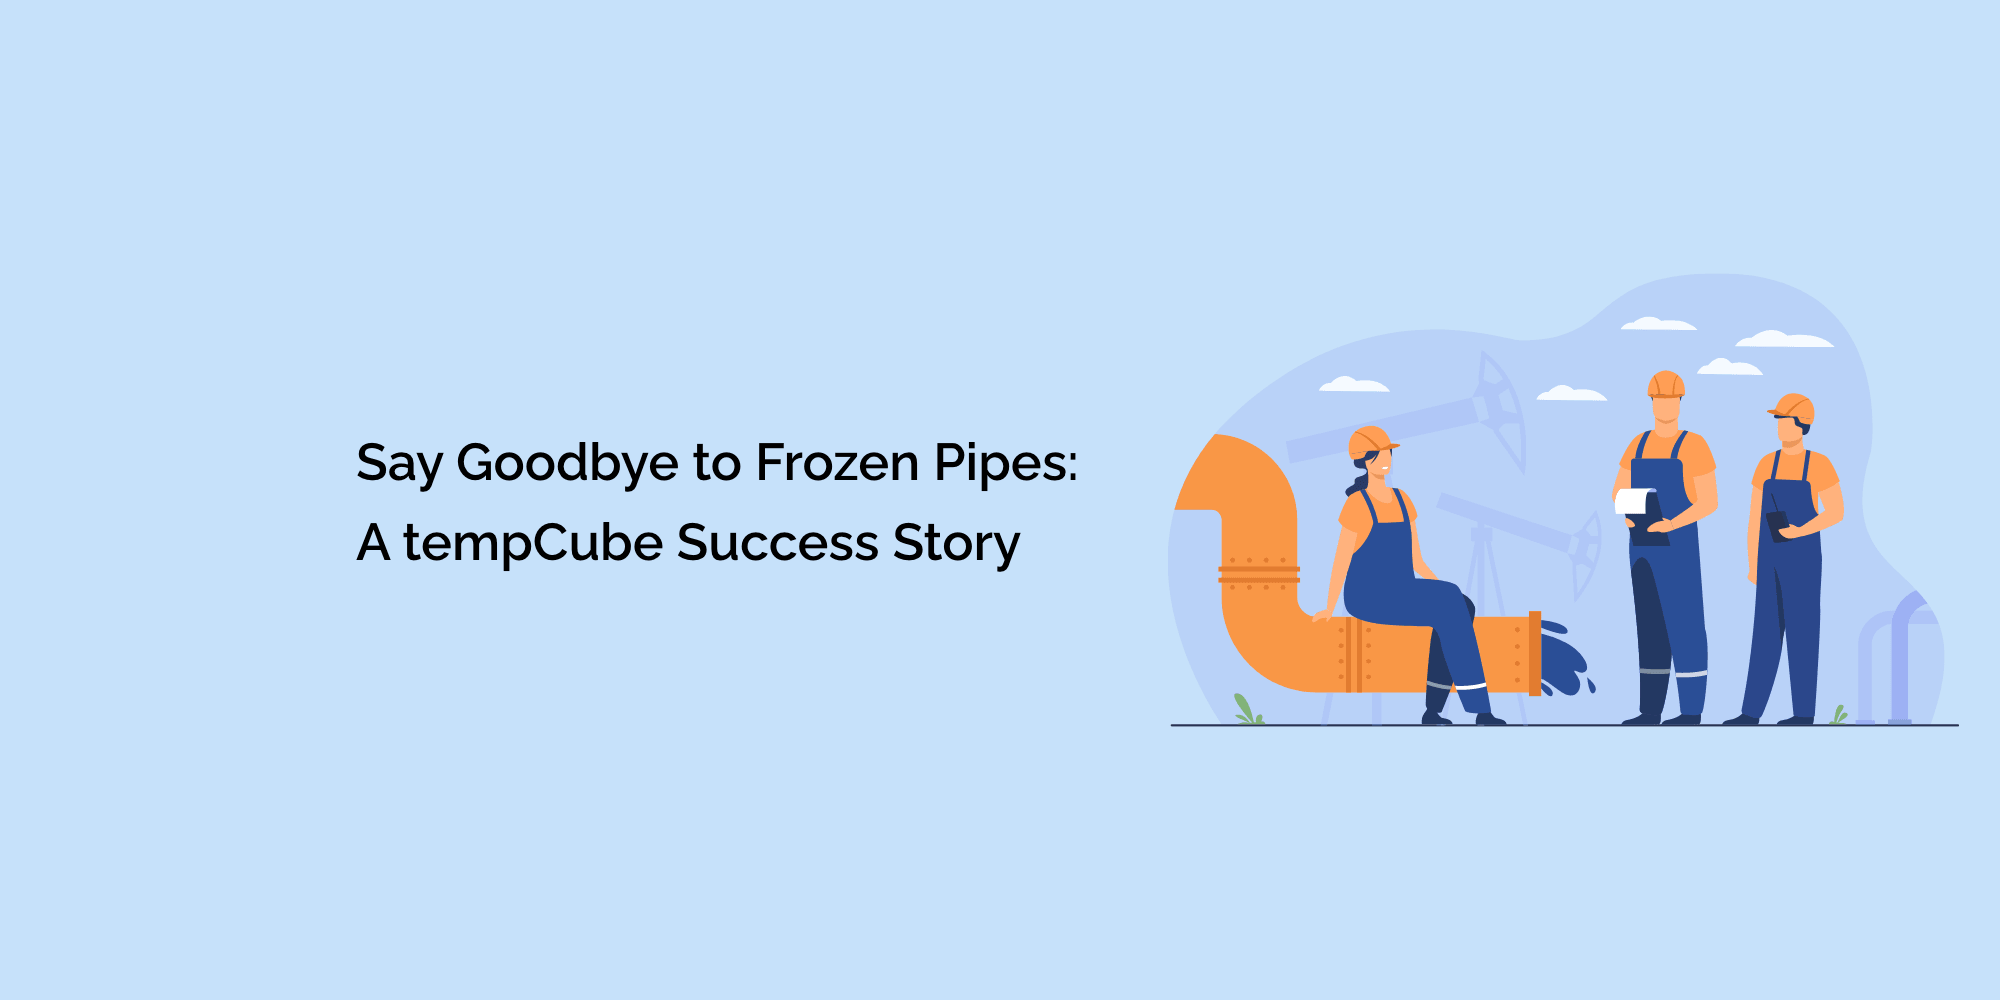 Say Goodbye to Frozen Pipes: A tempCube Success Story